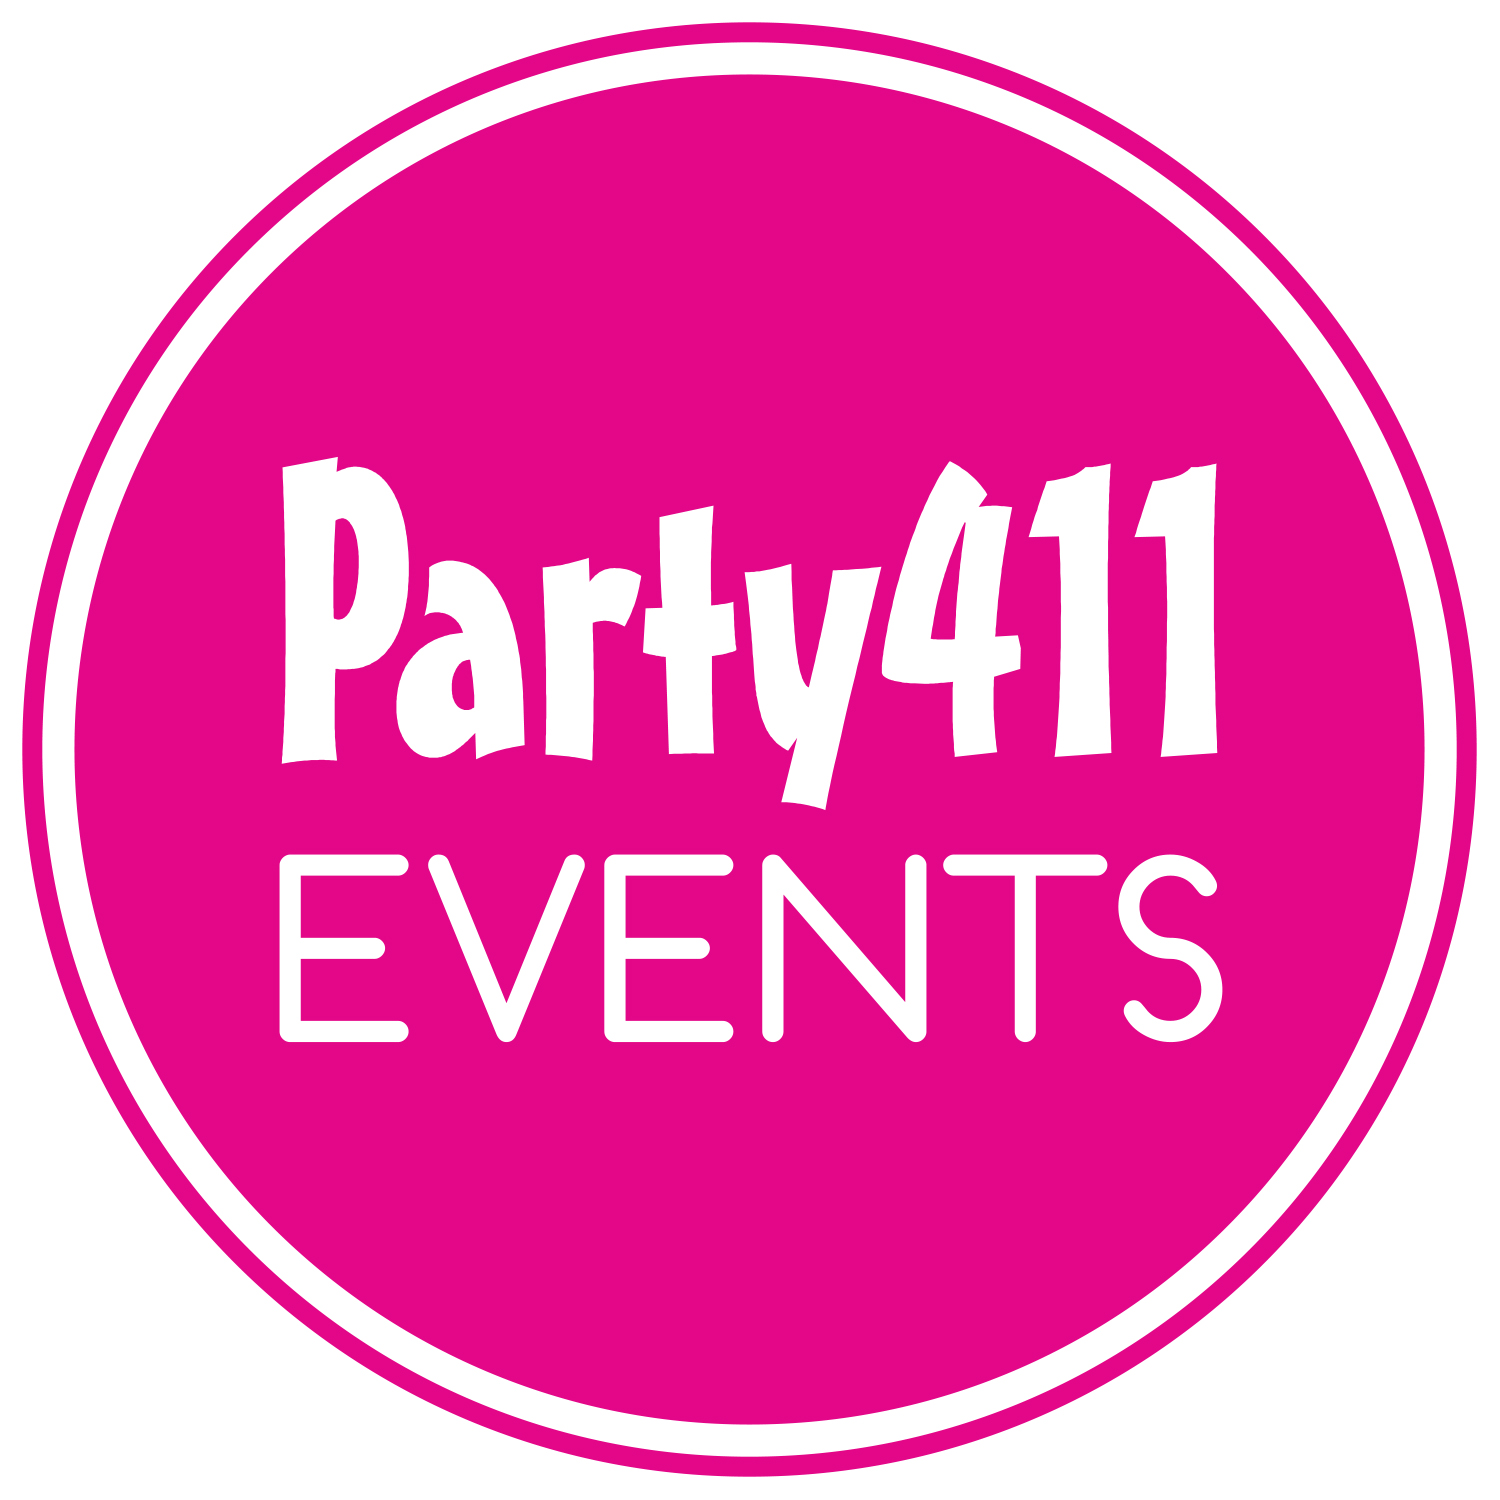 Party 411 Events